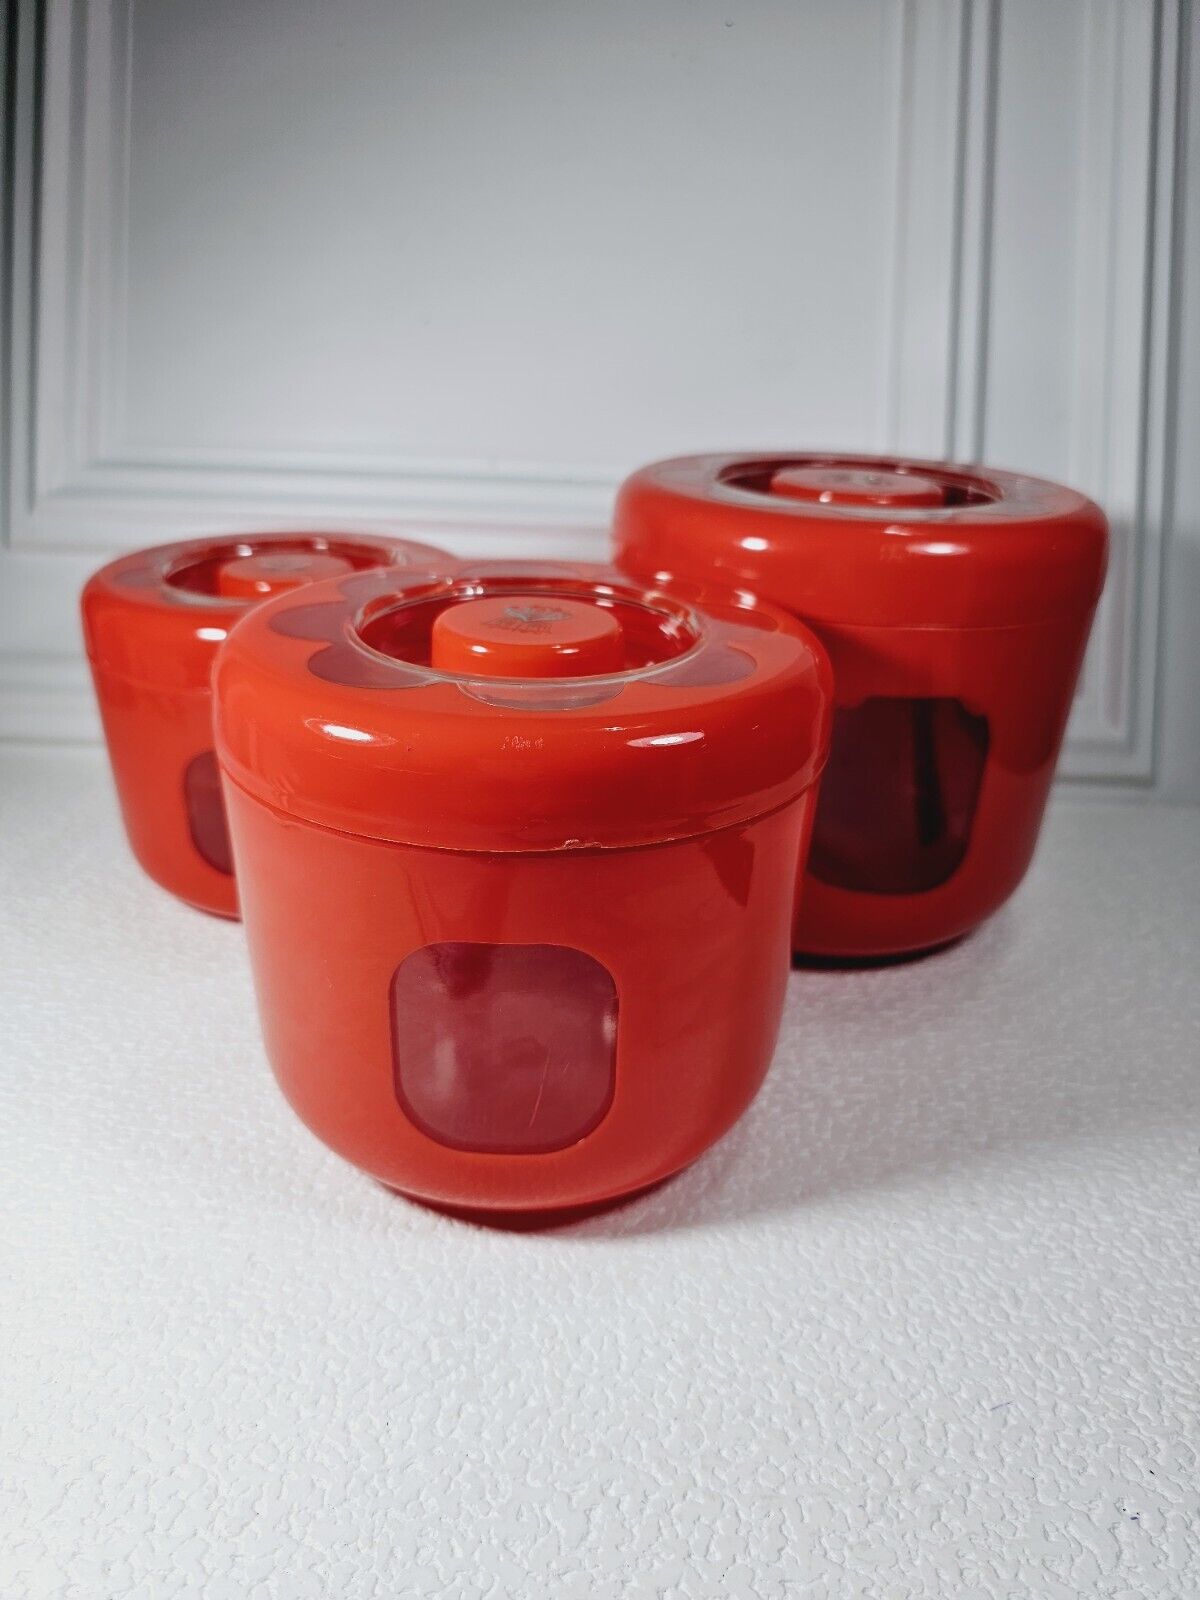 Vintage 1970s Red Flower Canister Set, Peek-a-Boo Window, Japan Made